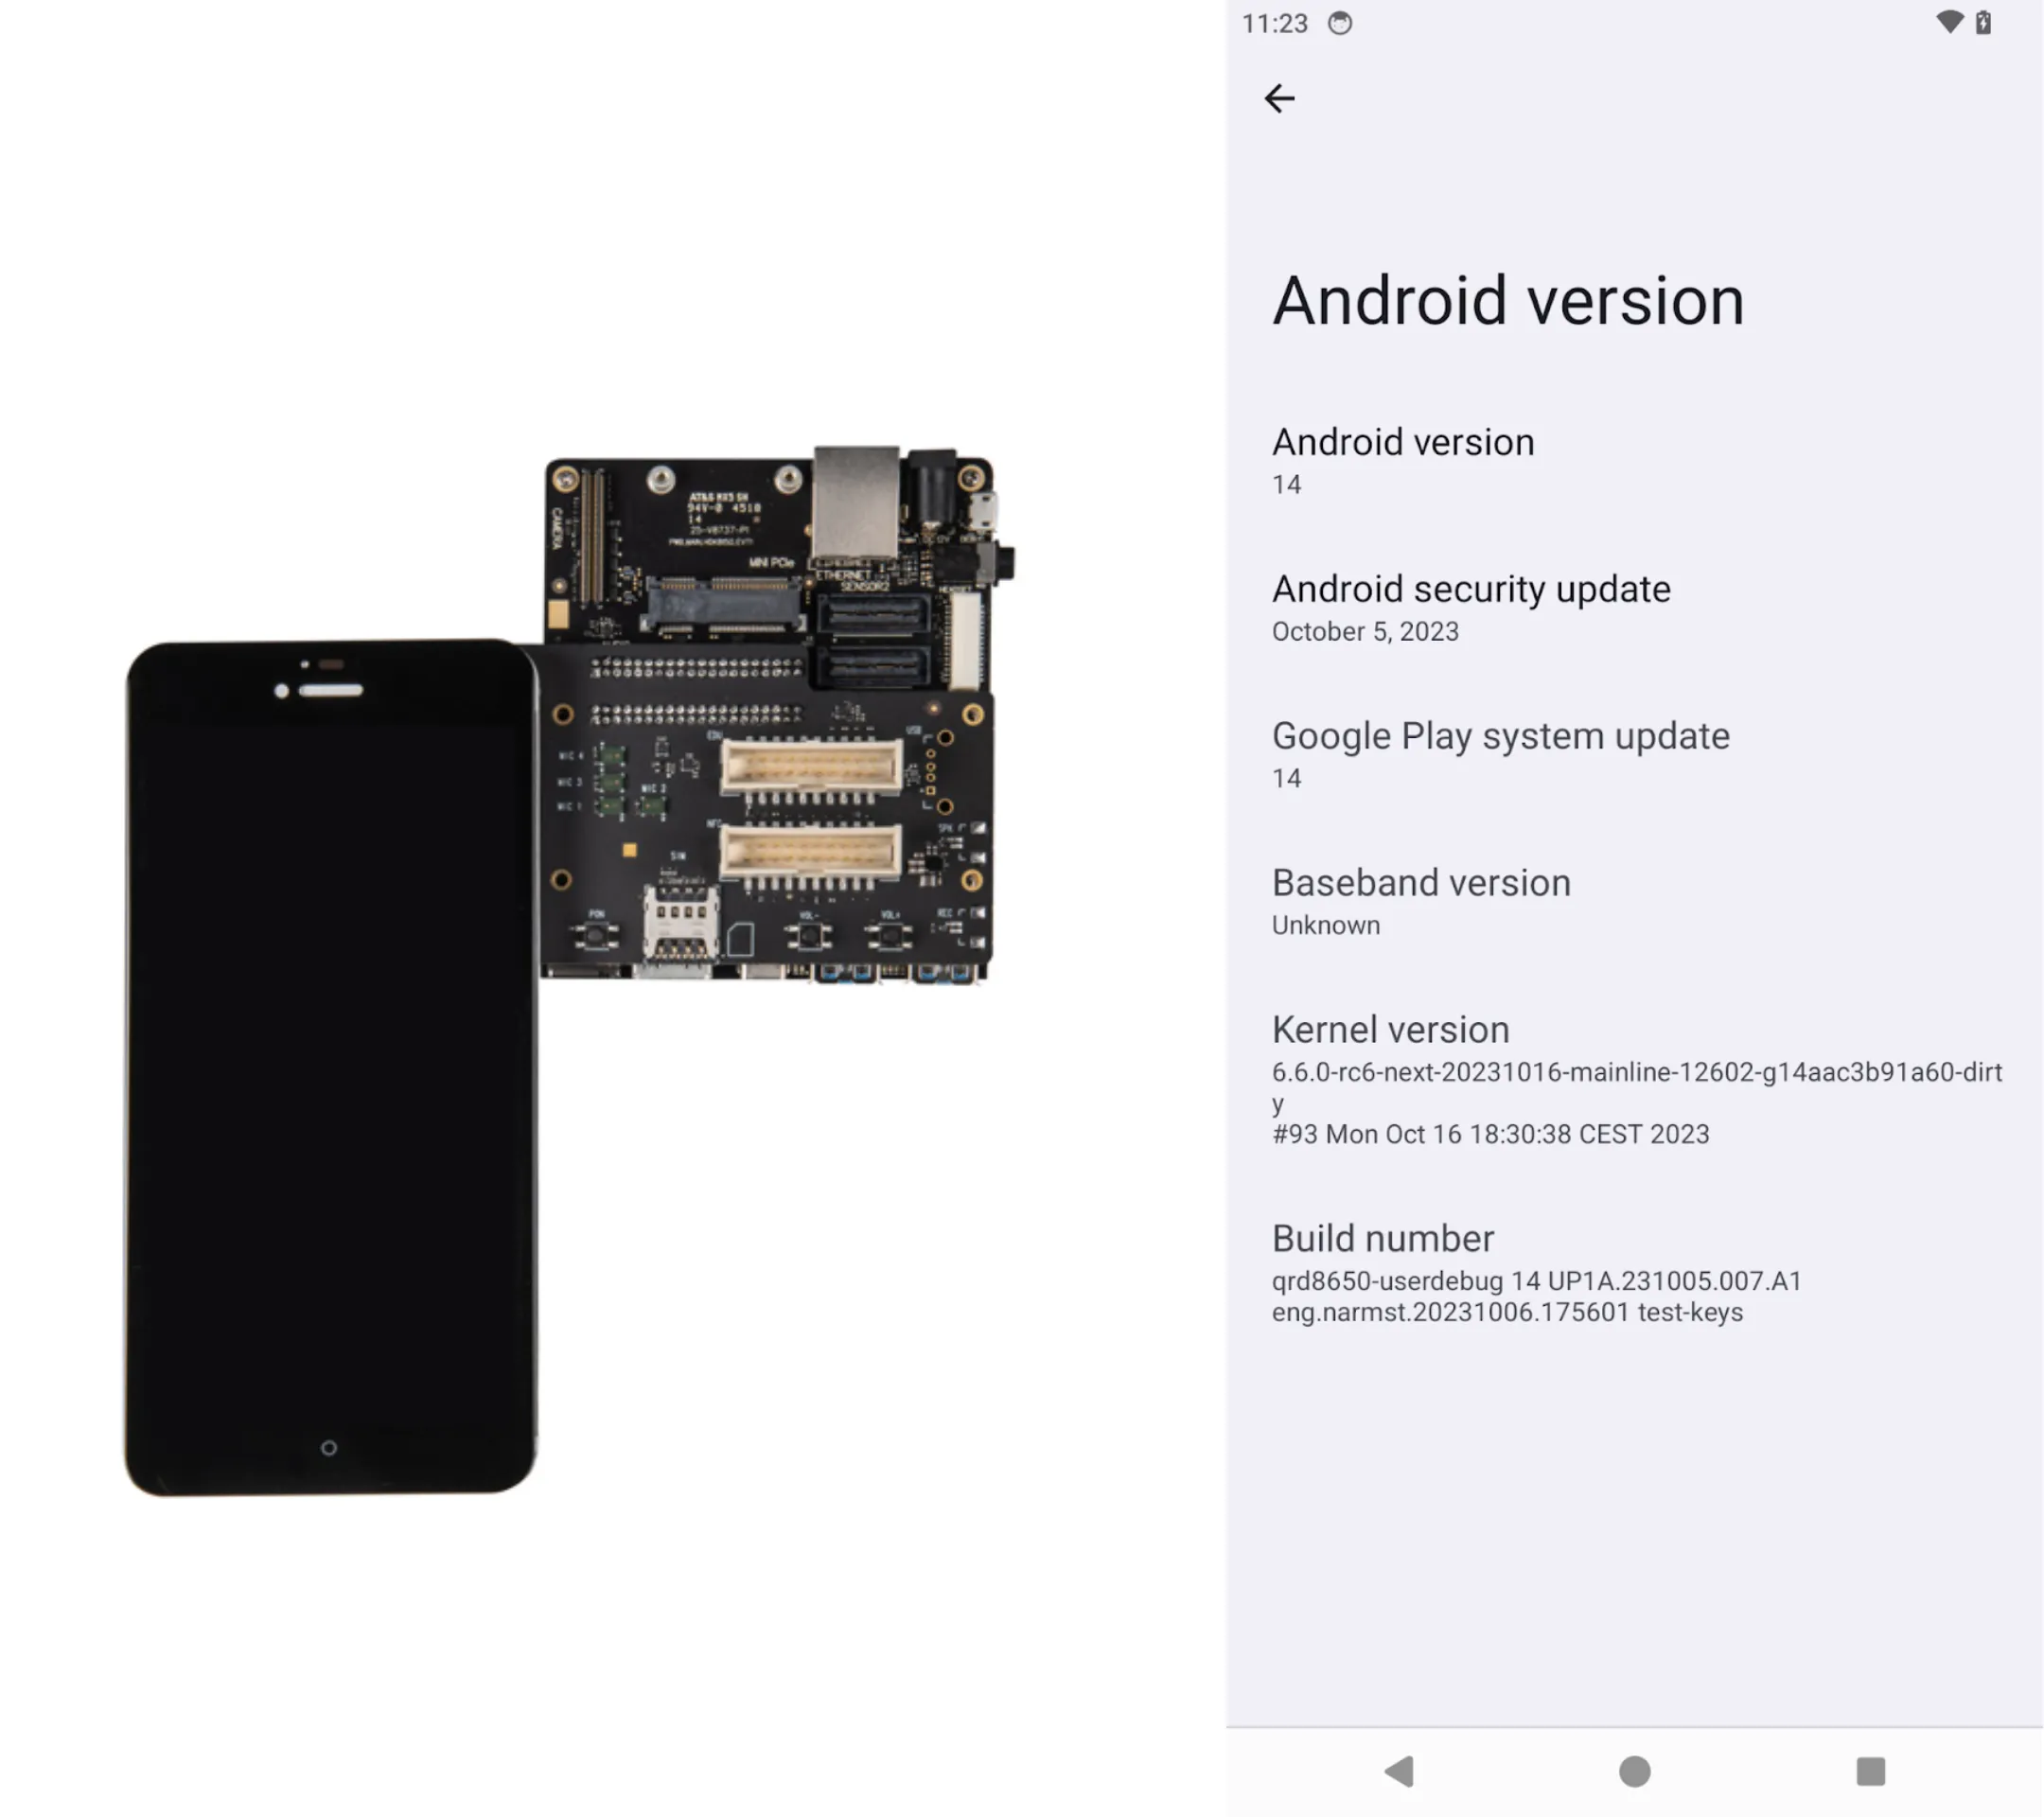 On the left: Picture of a Qualcomm Development Kit with the attached debug board. On the right: Screenshot of the Android Version menu showing the device running Android 14 and running the v6.6-rc6 based Linux tree